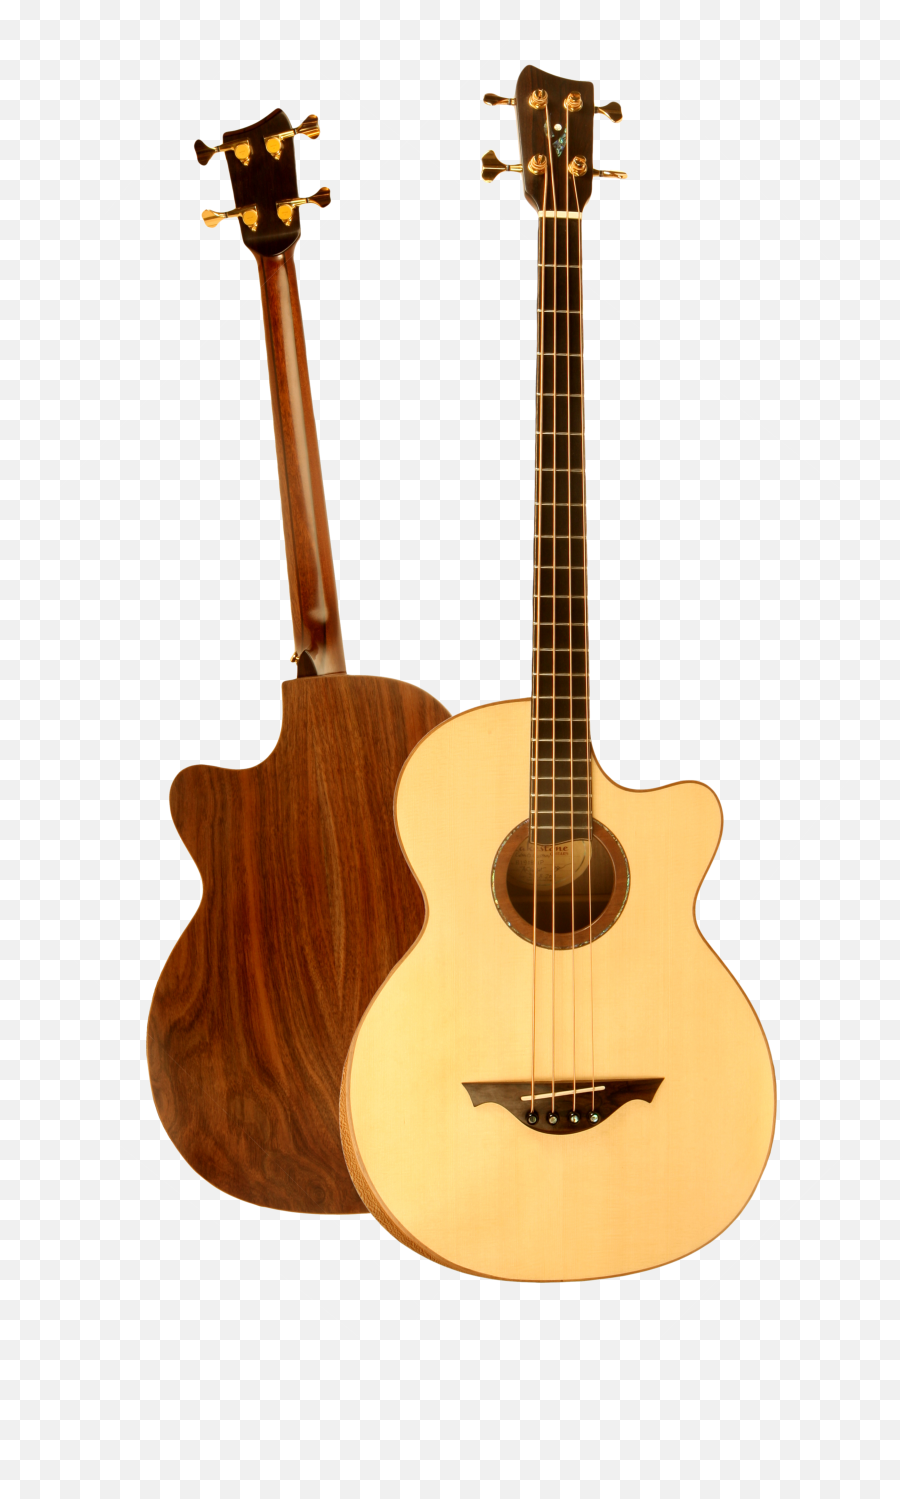 Lakestone Guitars - Our Guitar Models Solid Emoji,How To Channel Emotion In Guitar